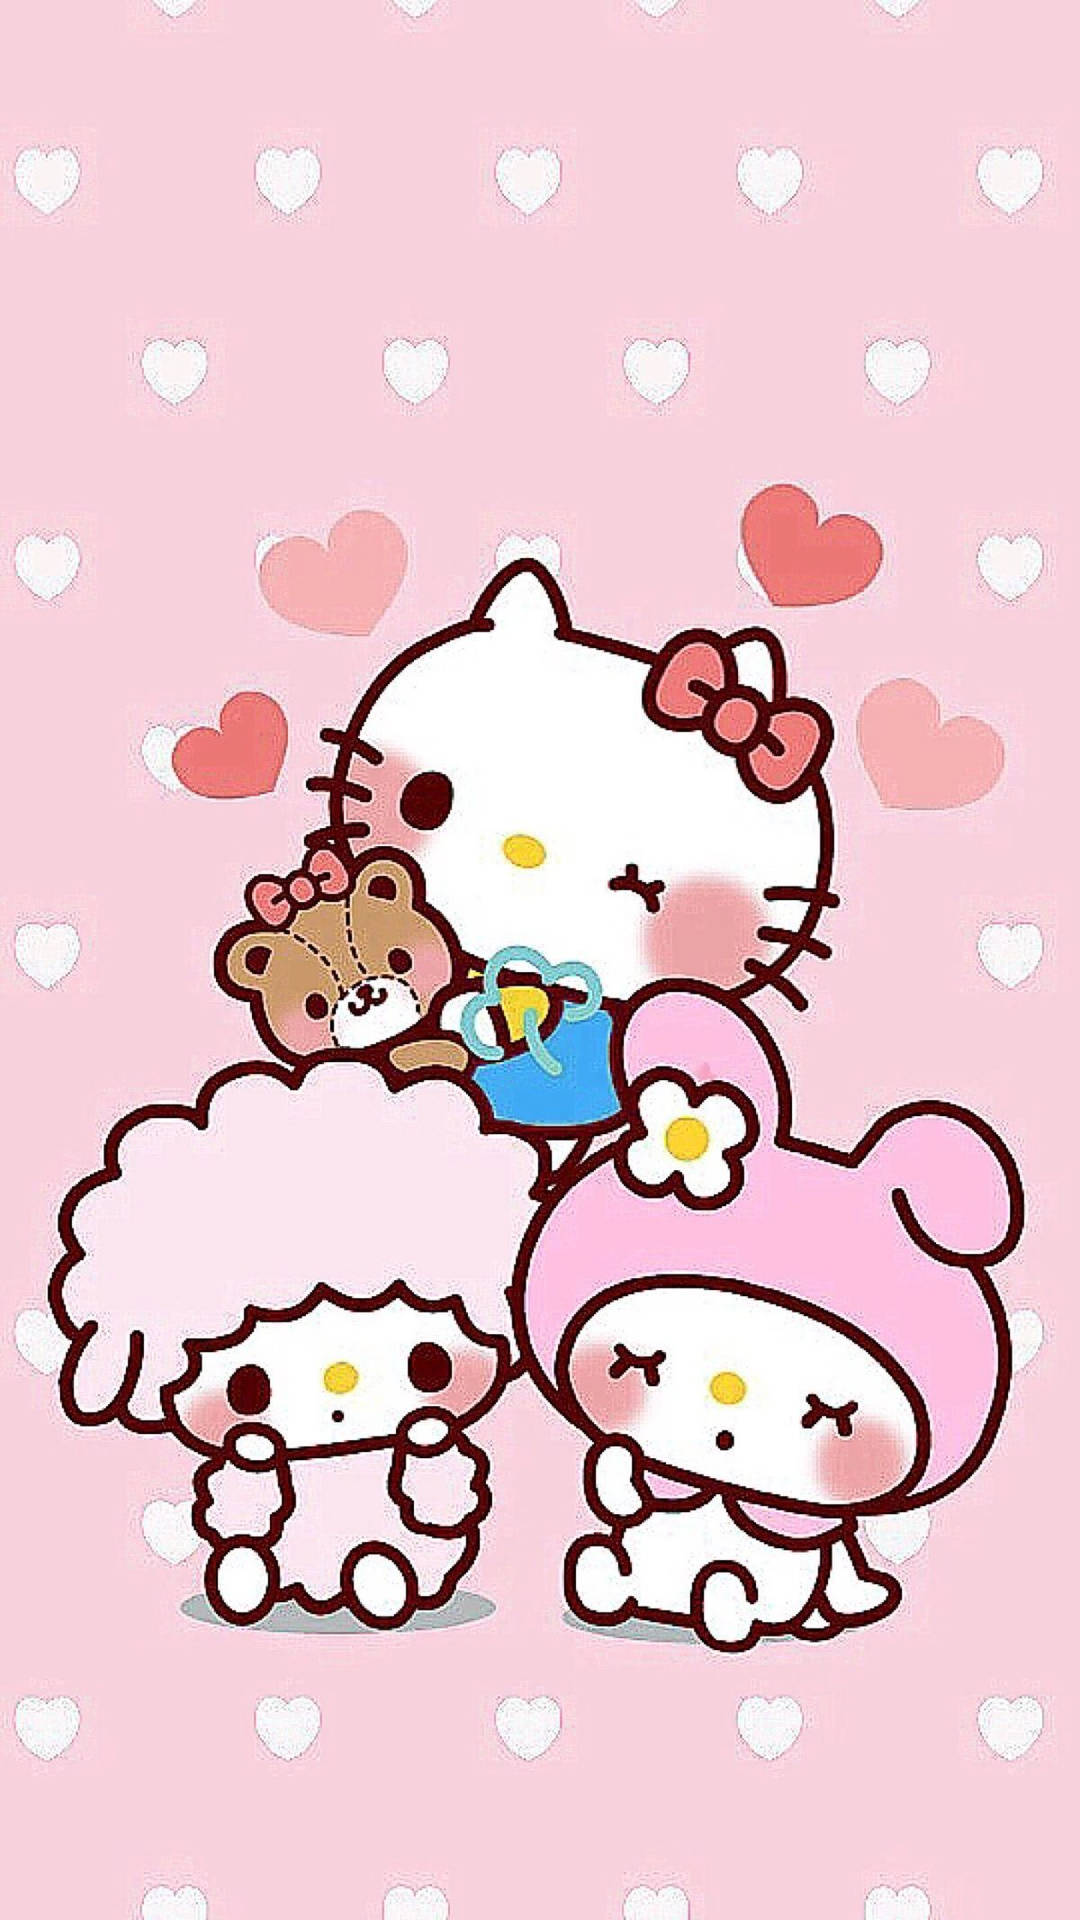 "Adorable Sanrio character ready to bring joy to your day!" Wallpaper